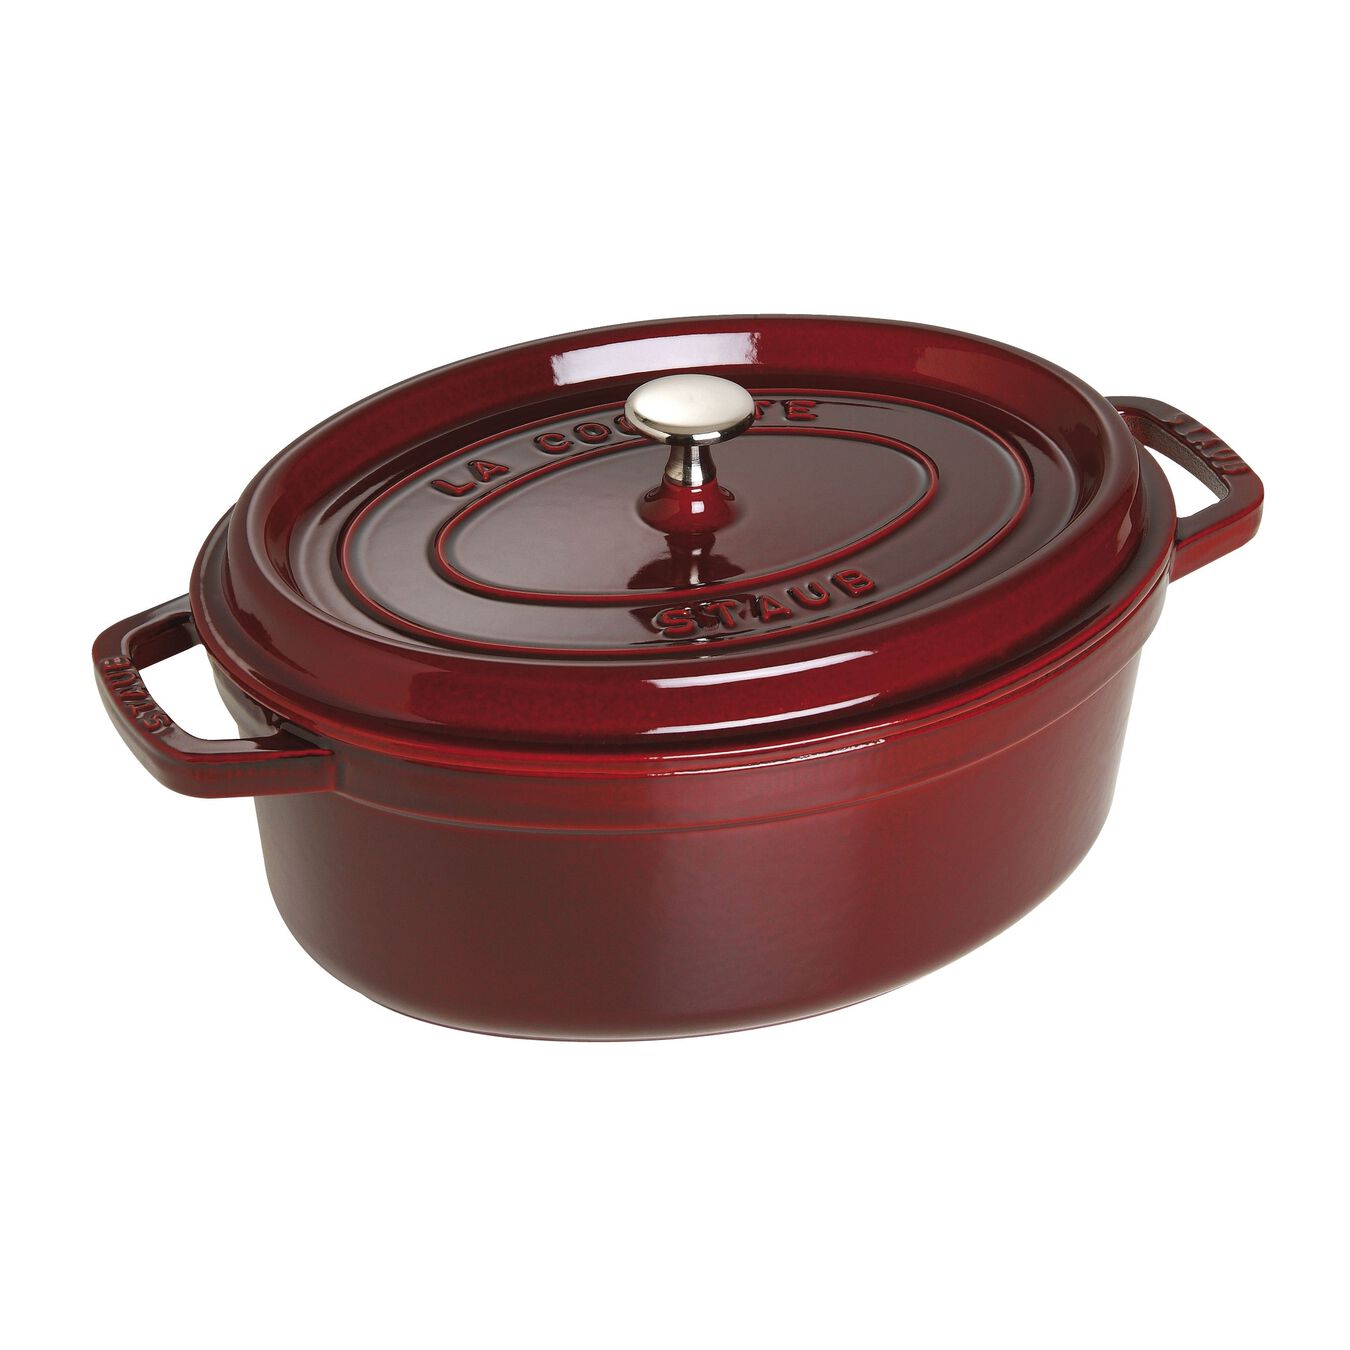 4.25 l cast iron oval Cocotte, grenadine-red,,large 2